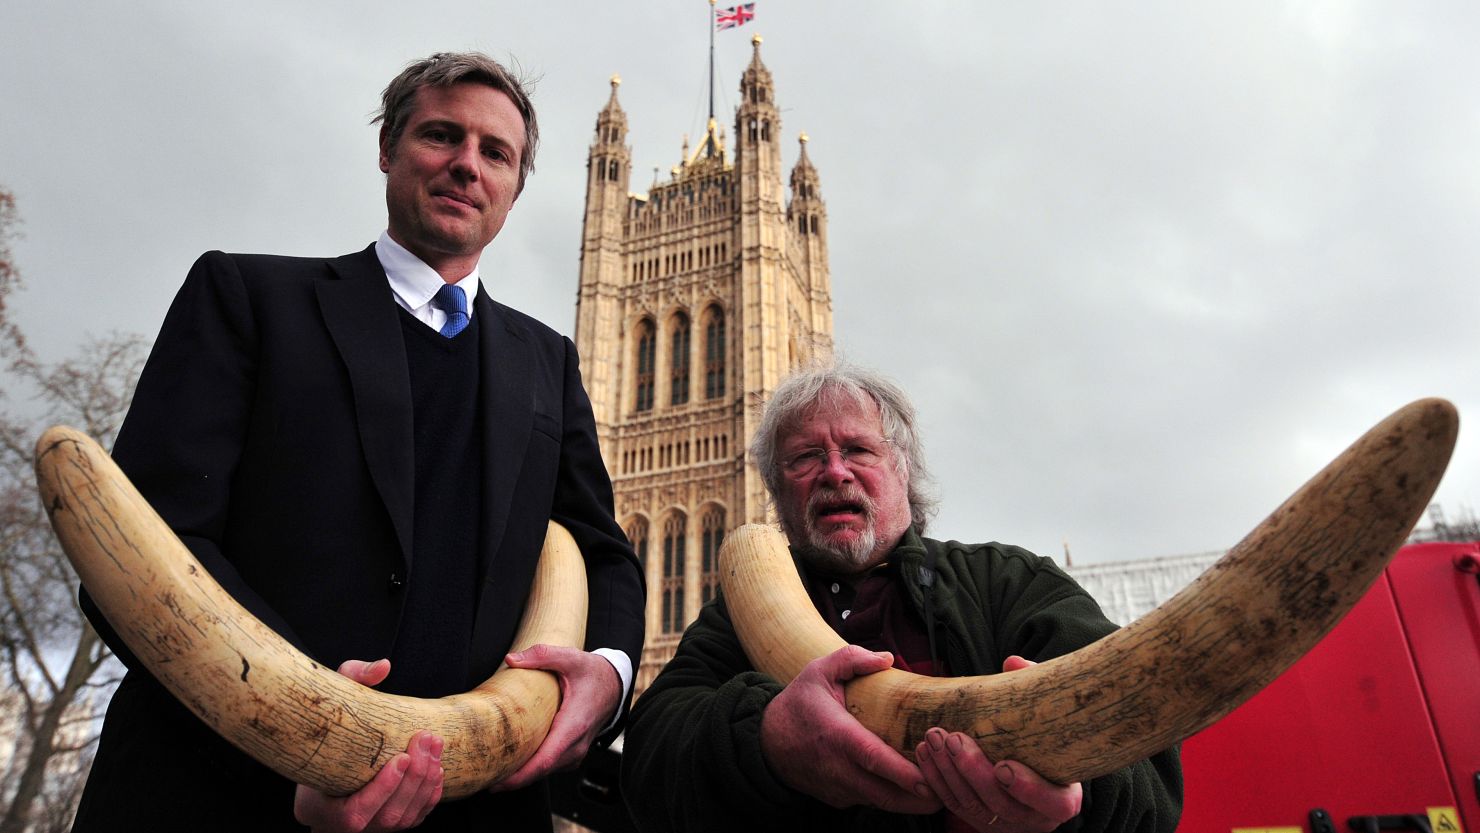 British politician Zac Goldsmith, left, and TV personality Bill Oddie raise awareness about the illegal wildlife trade this week.